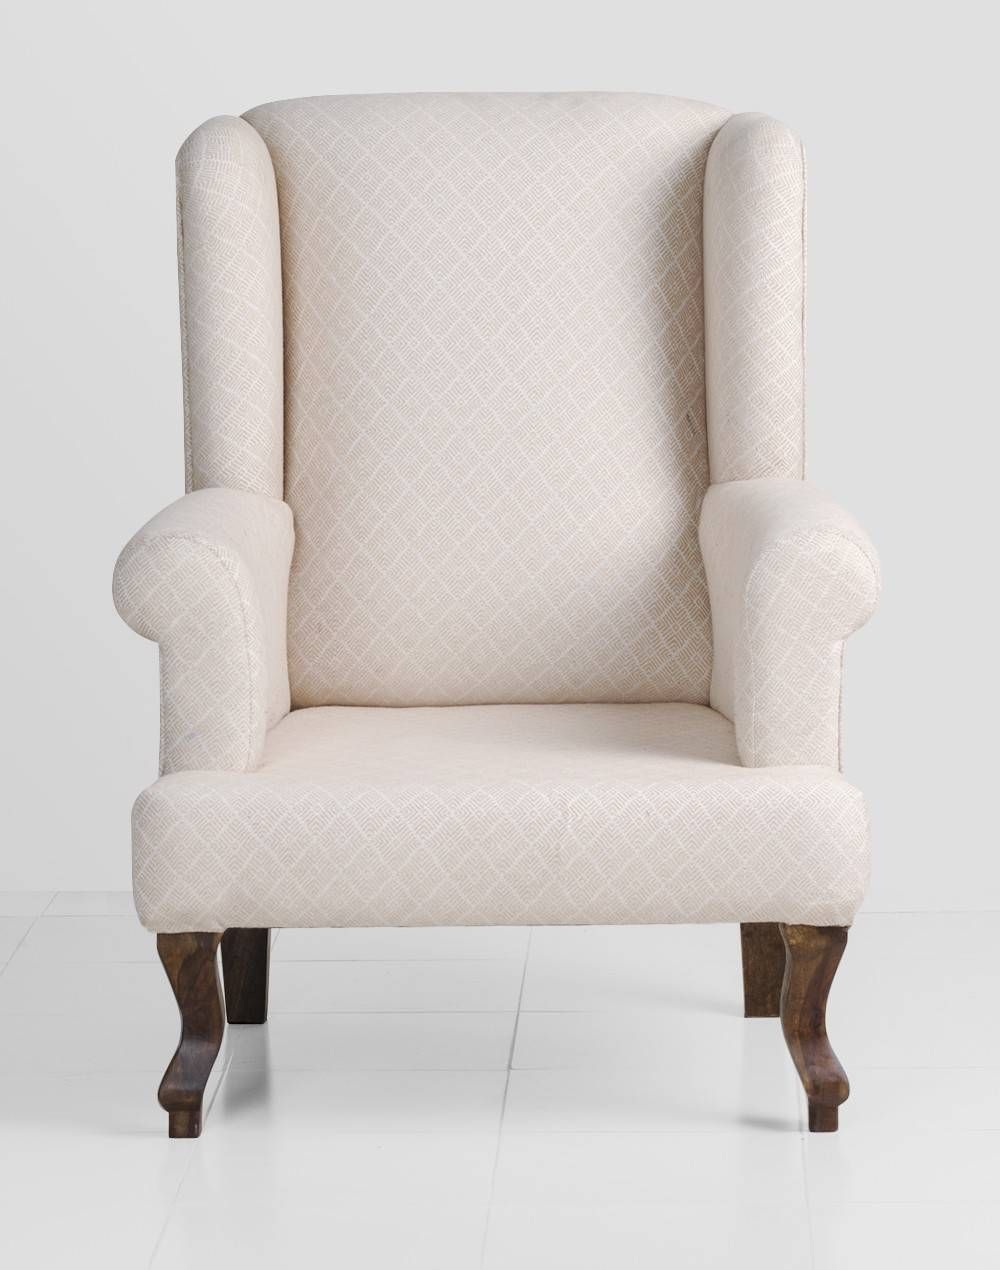 High Back Sofa Chair | Tehranmix Decoration Within High Back Sofas And Chairs (Photo 1 of 15)